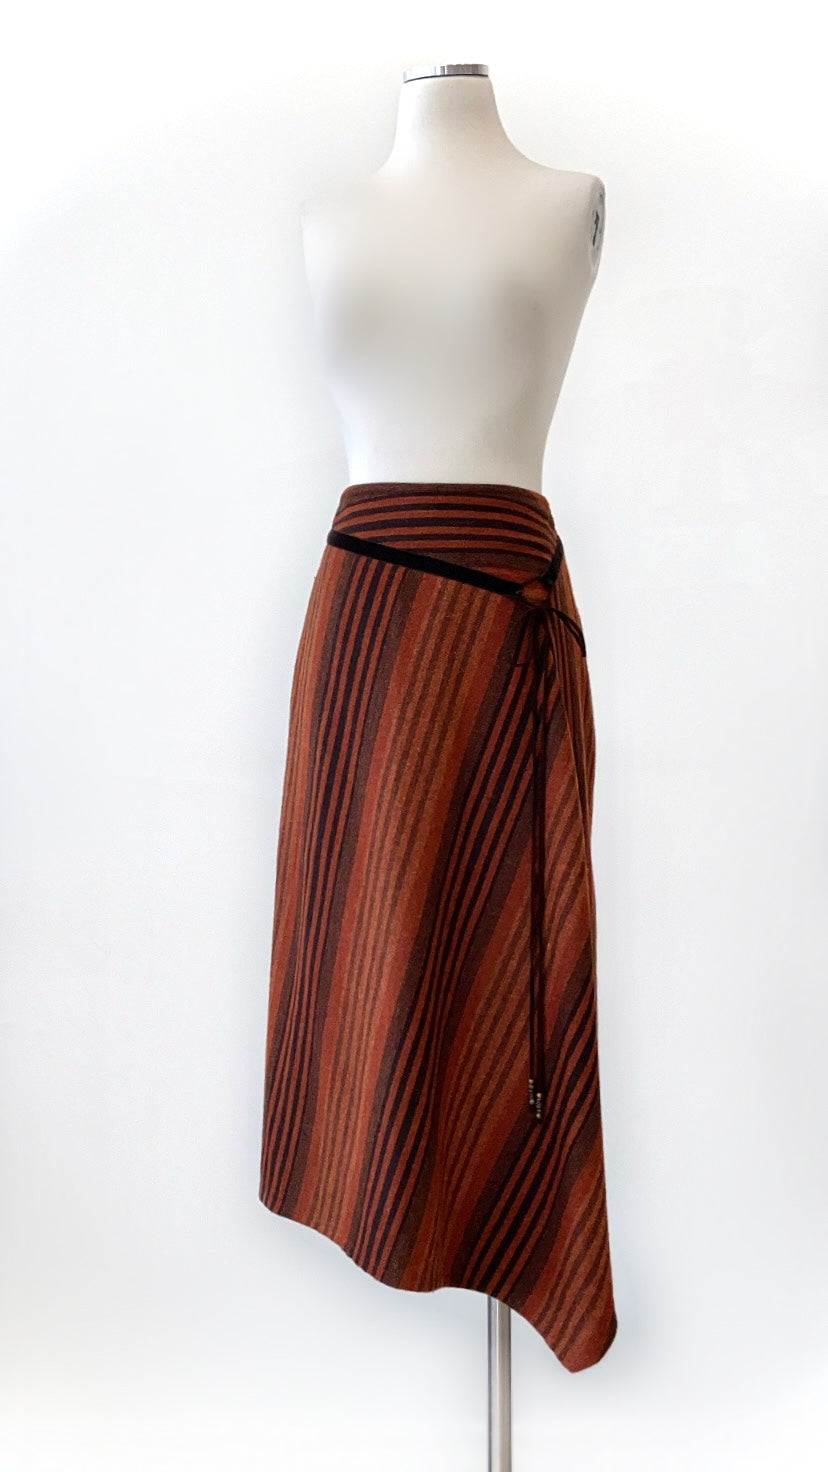 Striped Skirt with Suede Tie